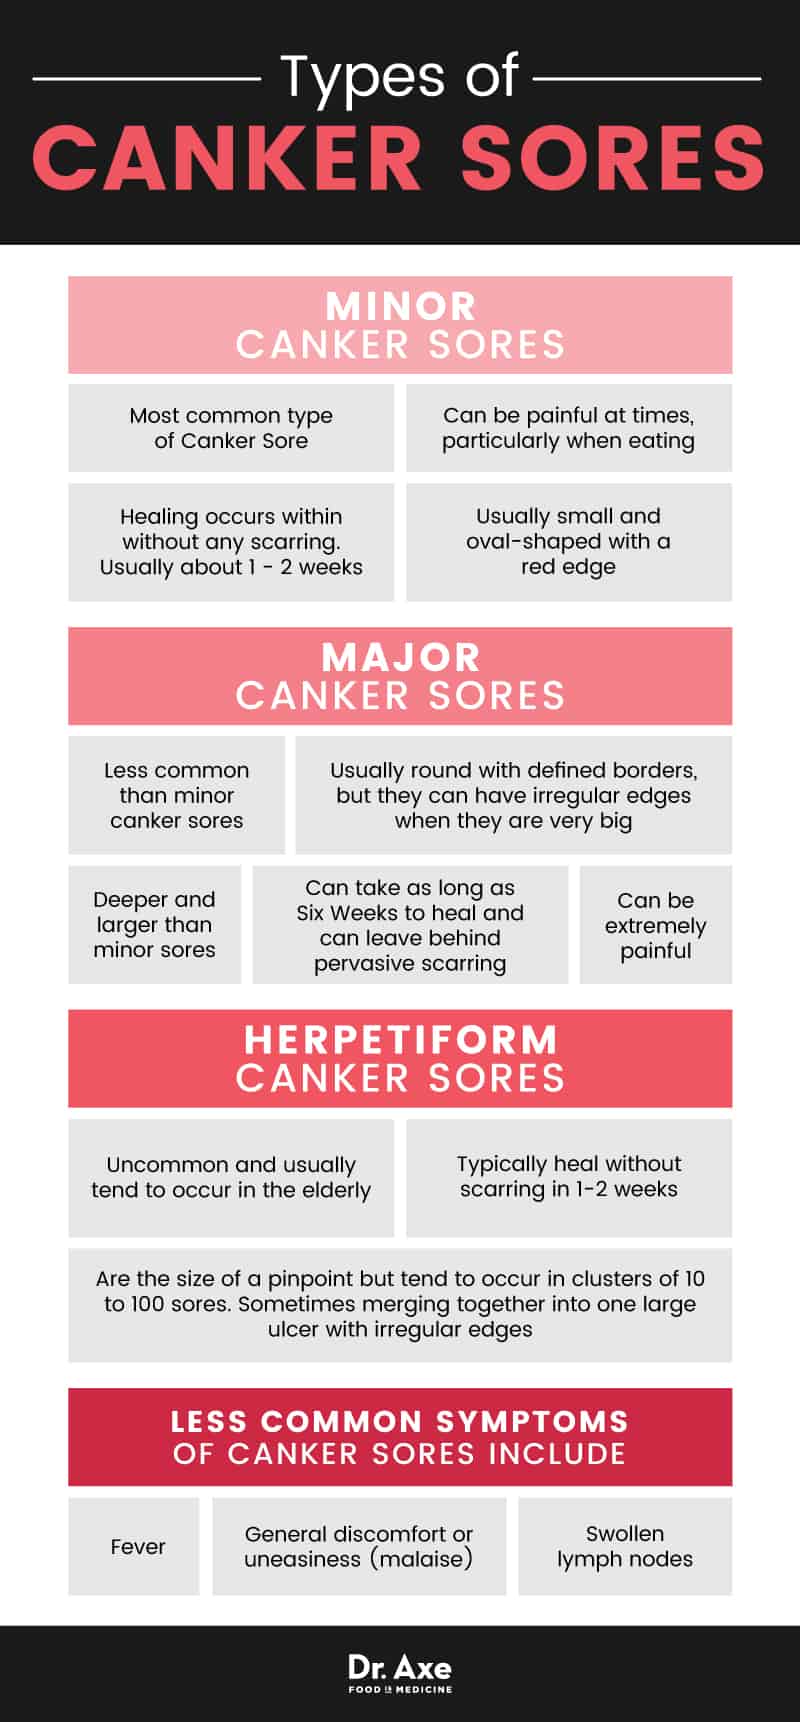 Canker sore: types of canker sores - Dr. Axe